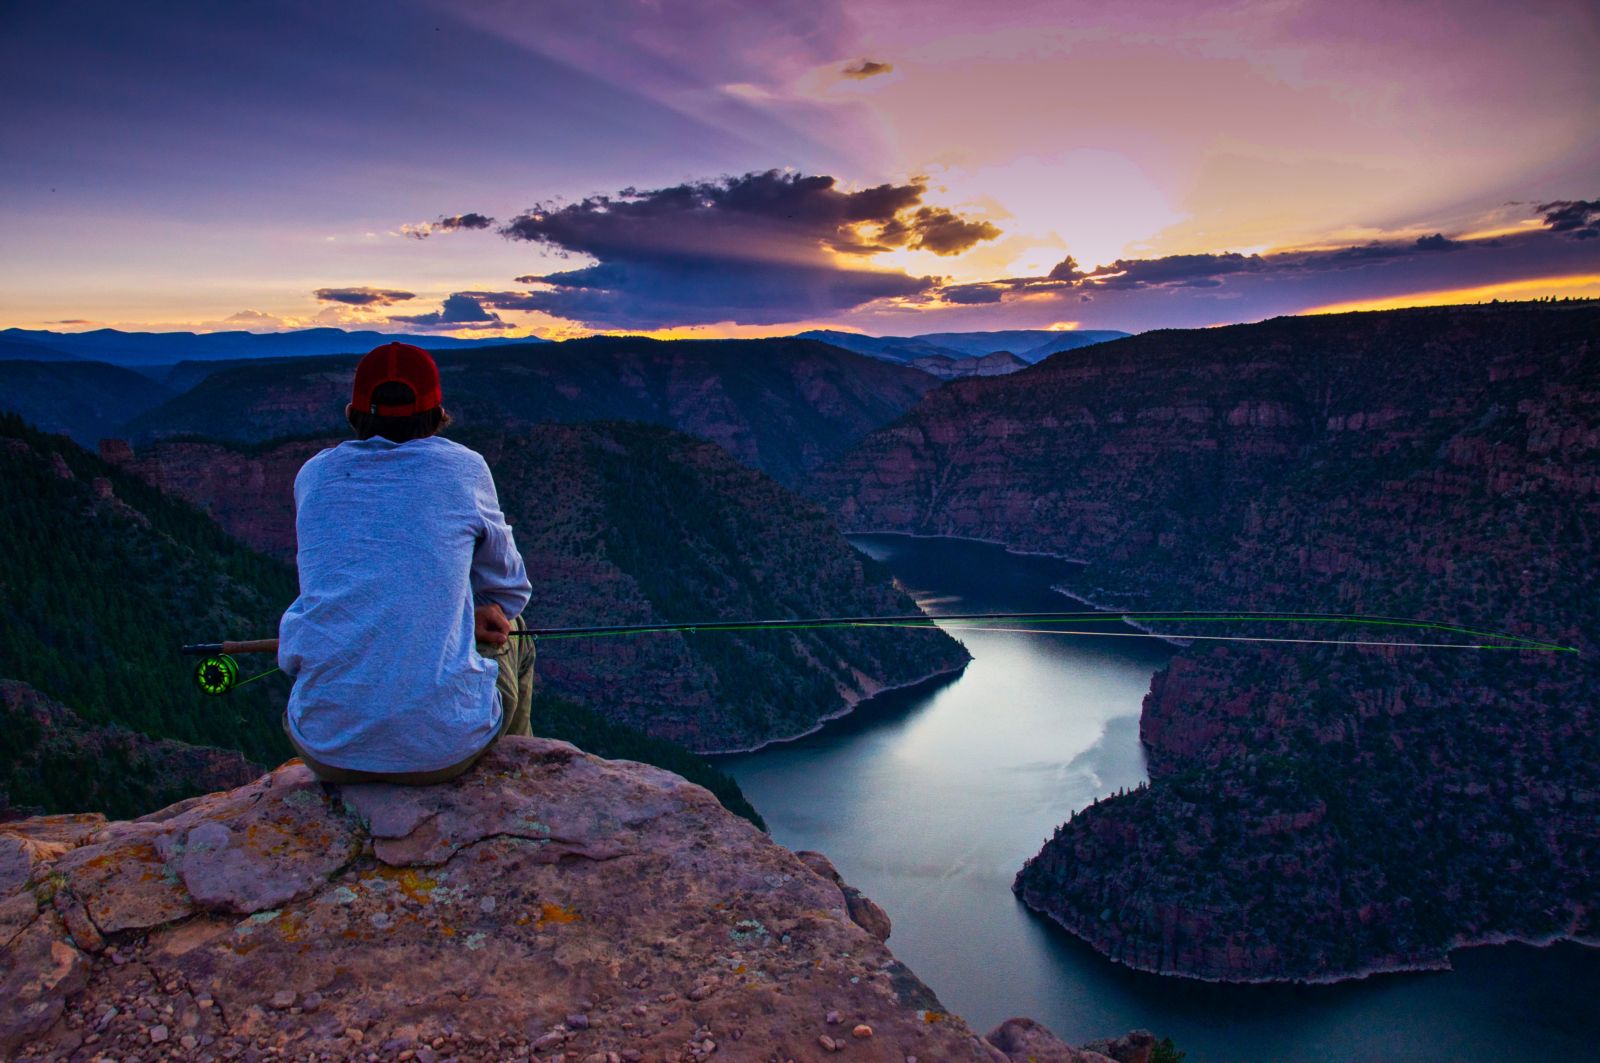 You don't have to be an experienced angler to catch a trophy fish at Flaming Gorge.